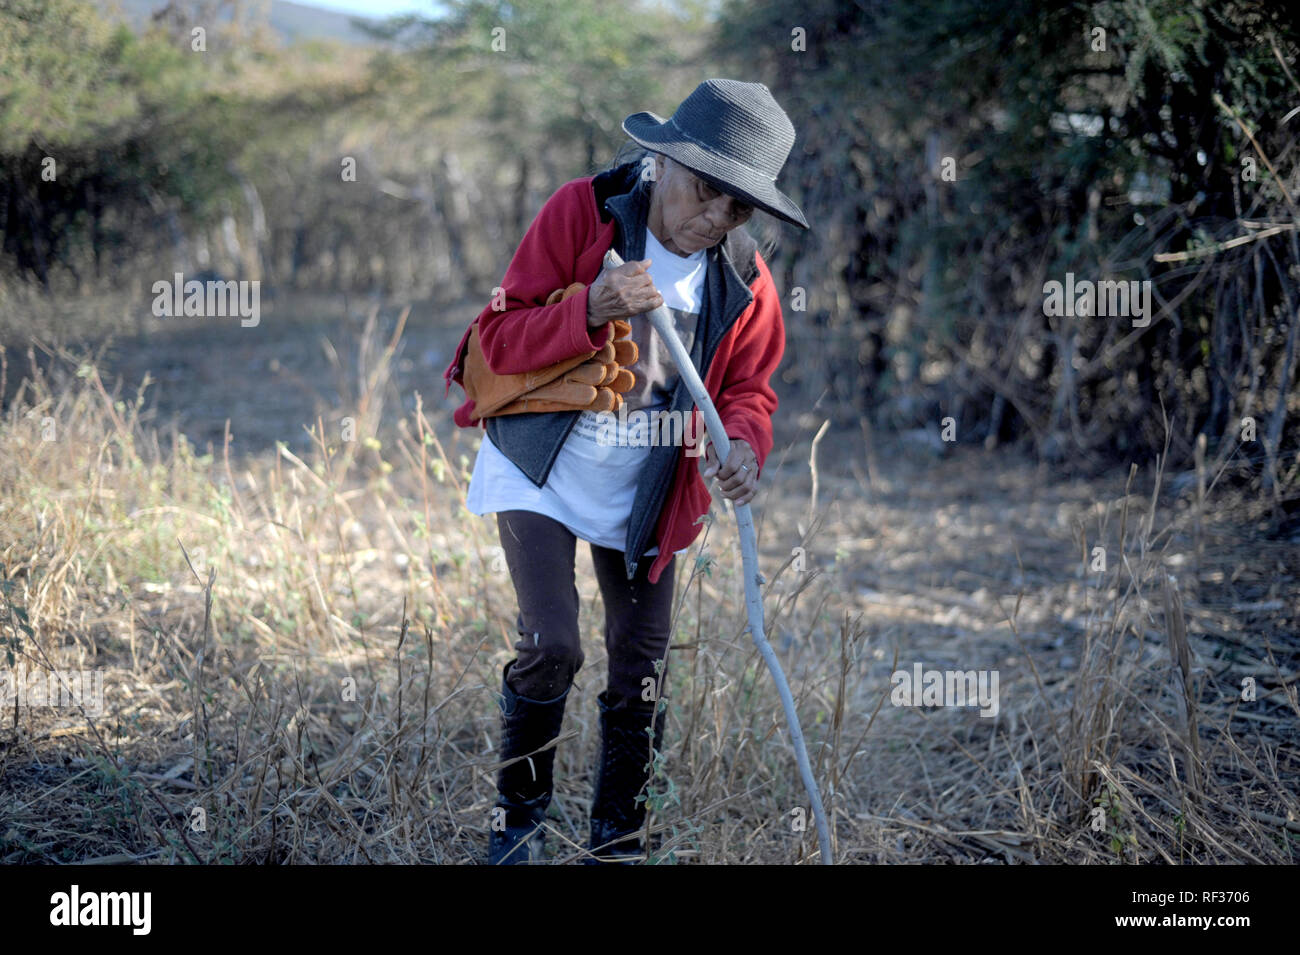 23 January 2019, Mexico, Huitzuco: Participants of the 4th National Search Brigade are searching for hidden graves. More than 40,000 people are considered missing in Mexico. A group of relatives tries on their own to find hidden graves and thus perhaps to make the mourning possible for some families. (to dpa 'The Search for Certainty - Hidden Tombs in Mexico' of 24.01.2019) Photo: Jesus Alvarado/dpa Stock Photo